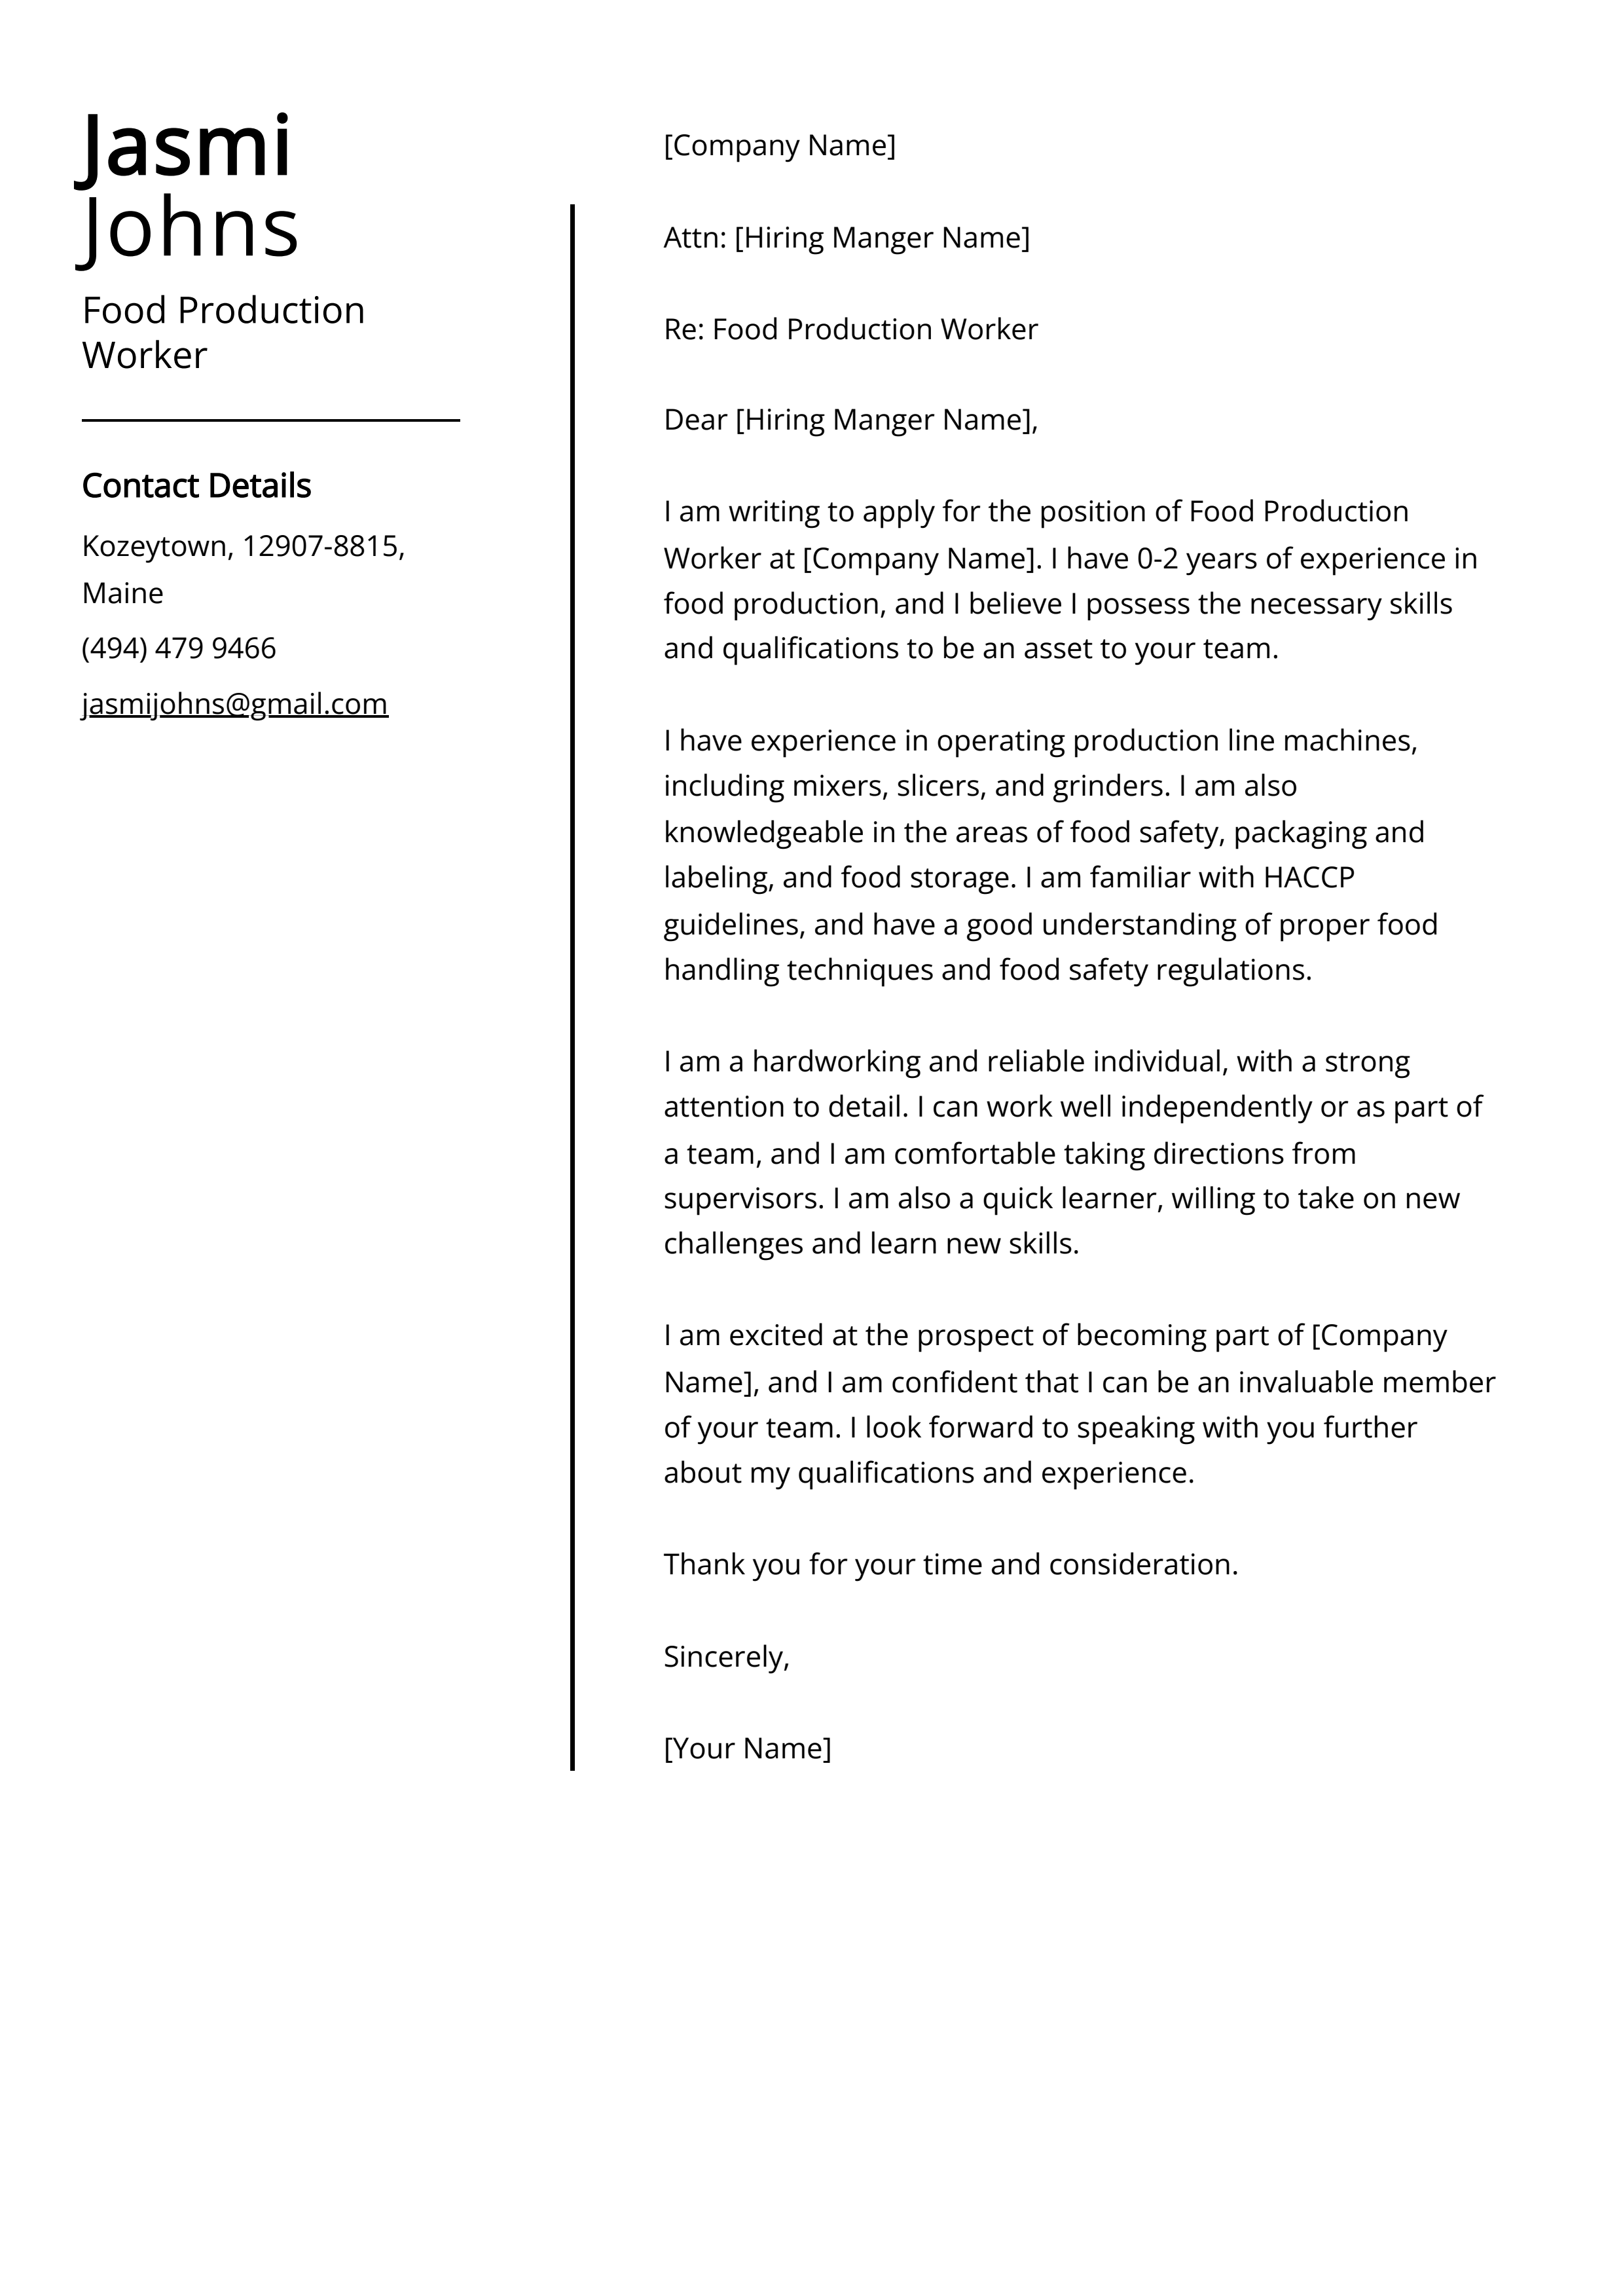 Food Production Worker Cover Letter Example